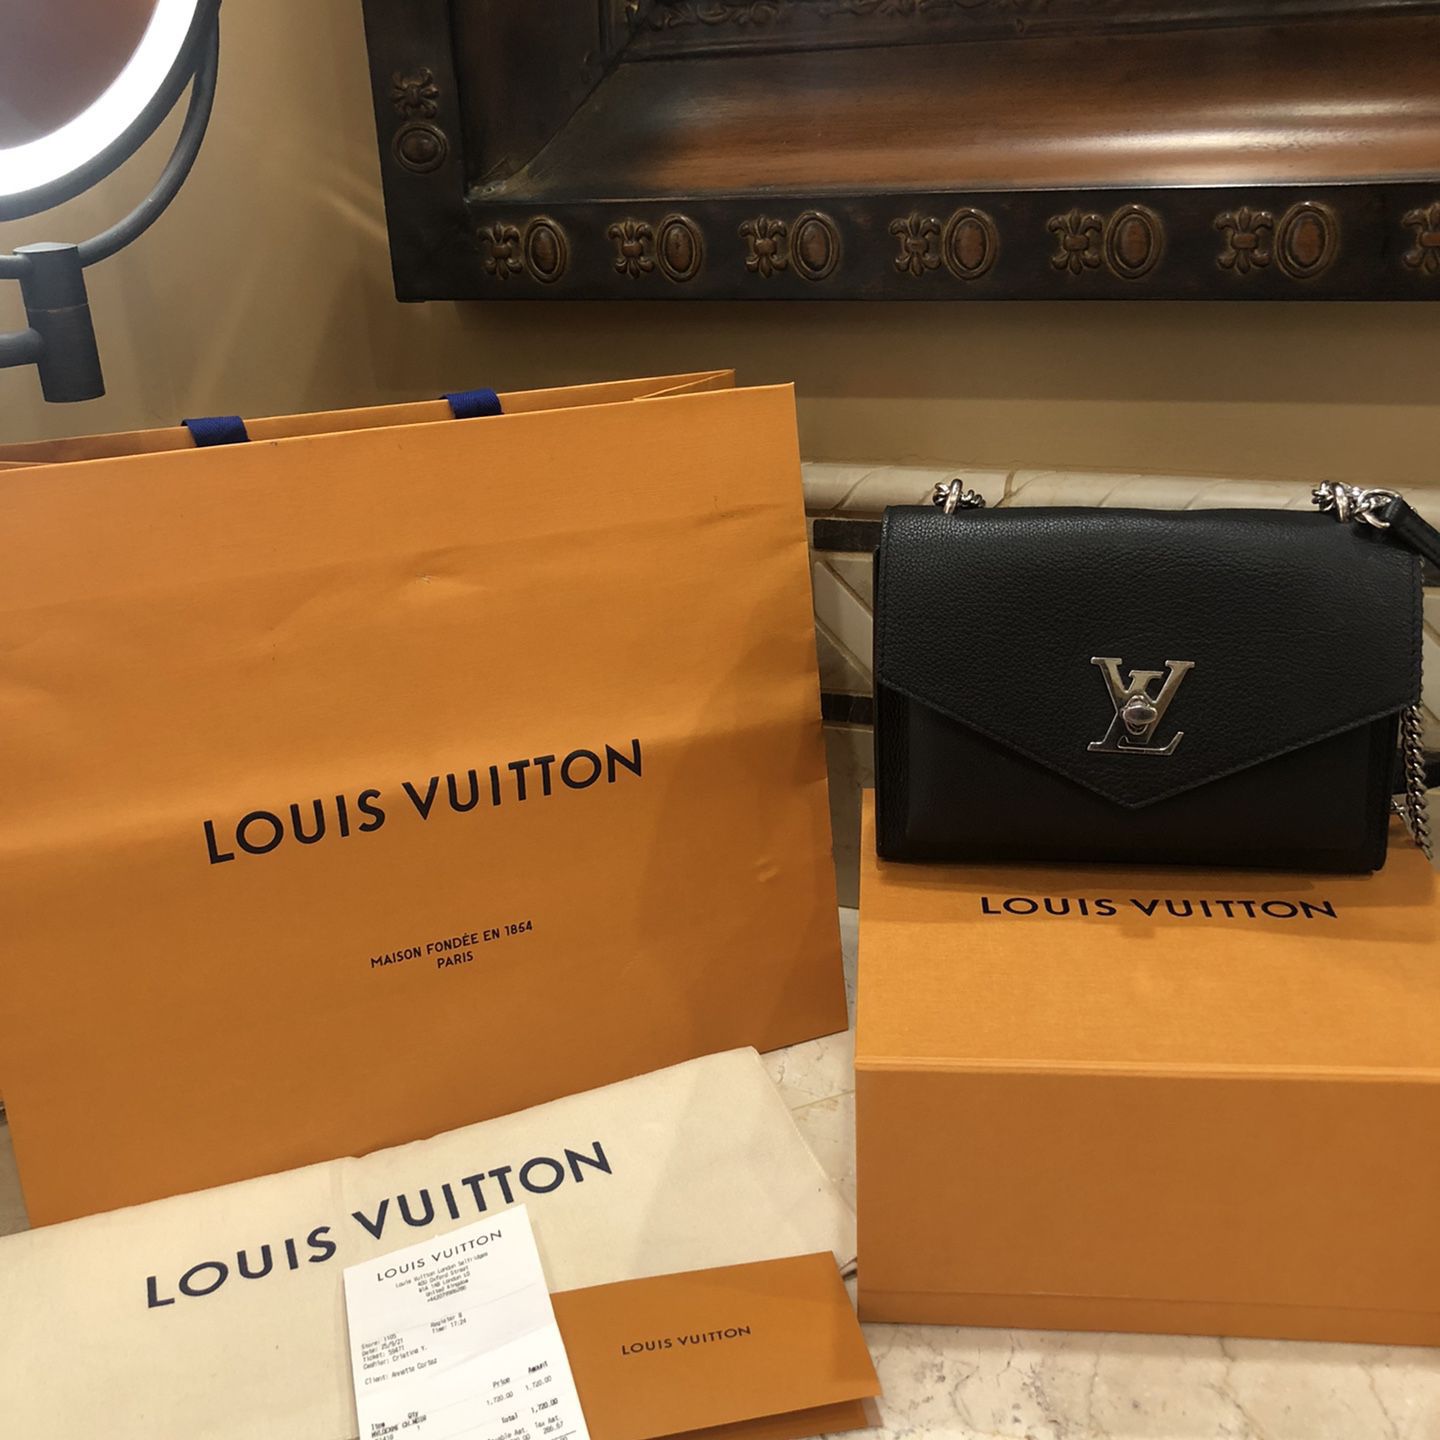 How to Sell Louis Vuitton Bags in London